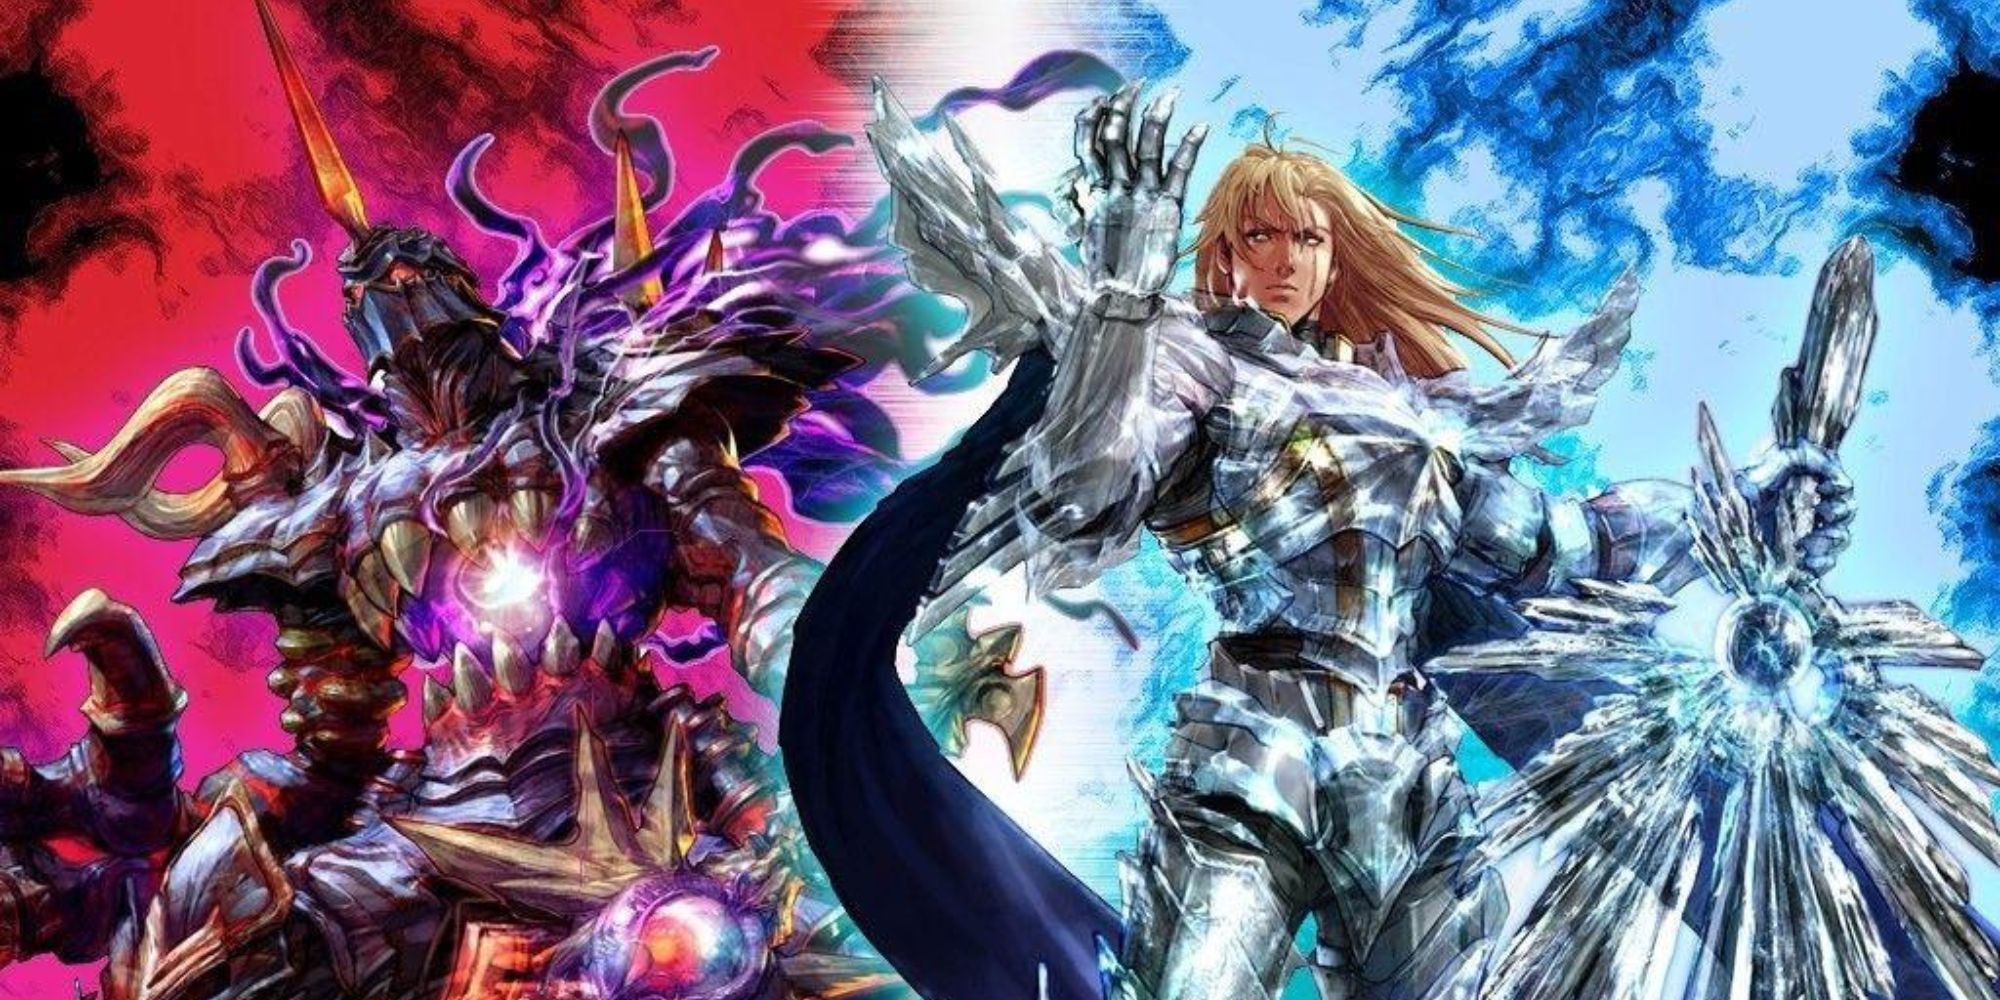 Art of Nightmare and Siegfried from SoulCalibur